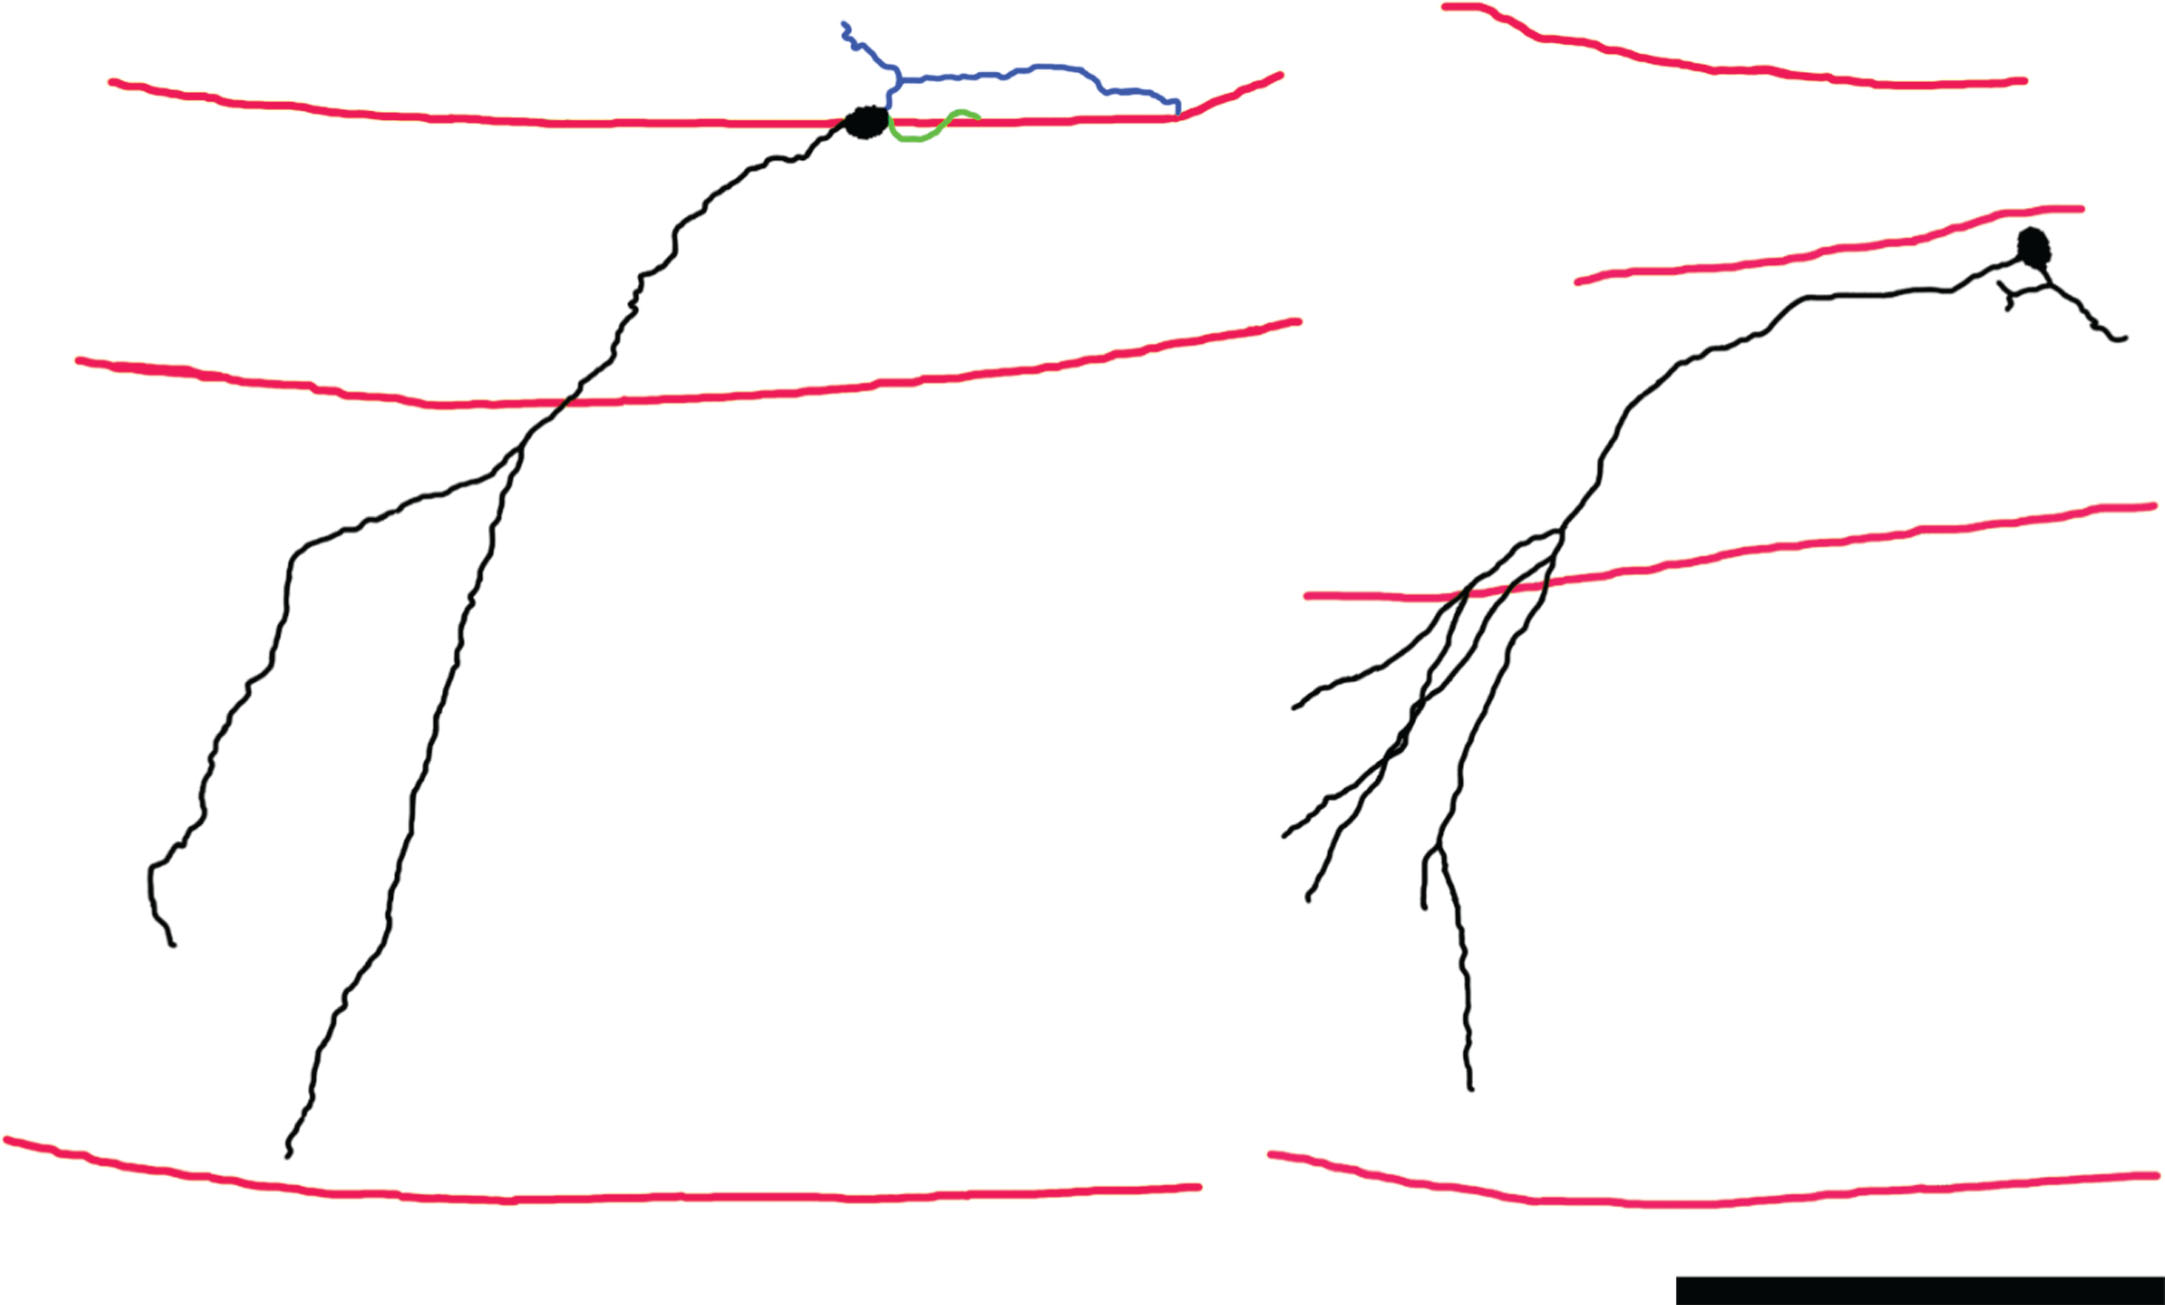 Neurolucida reconstructions of Thy1-GFP-expressing newborn hippocampal granule cells from mice rendered epileptic using the pilocarpine status epilepticus model. Dendrites and somas are shown in black, axons in blue and basal dendrites in green. Red lines denote the hilar—granule cell body layer border, the granule cell body layer—molecular layer border, and the hippocampal fissure, from top to bottom, respectively. The primary dendrites of these granule cells project obliquely into the molecular layer, rather than directly – as is typical for this cell type. The abnormality gives the cells a “windswept” appearance. Scale bar = 100μm. Portions of this image are reprinted from Santos et al. [55].